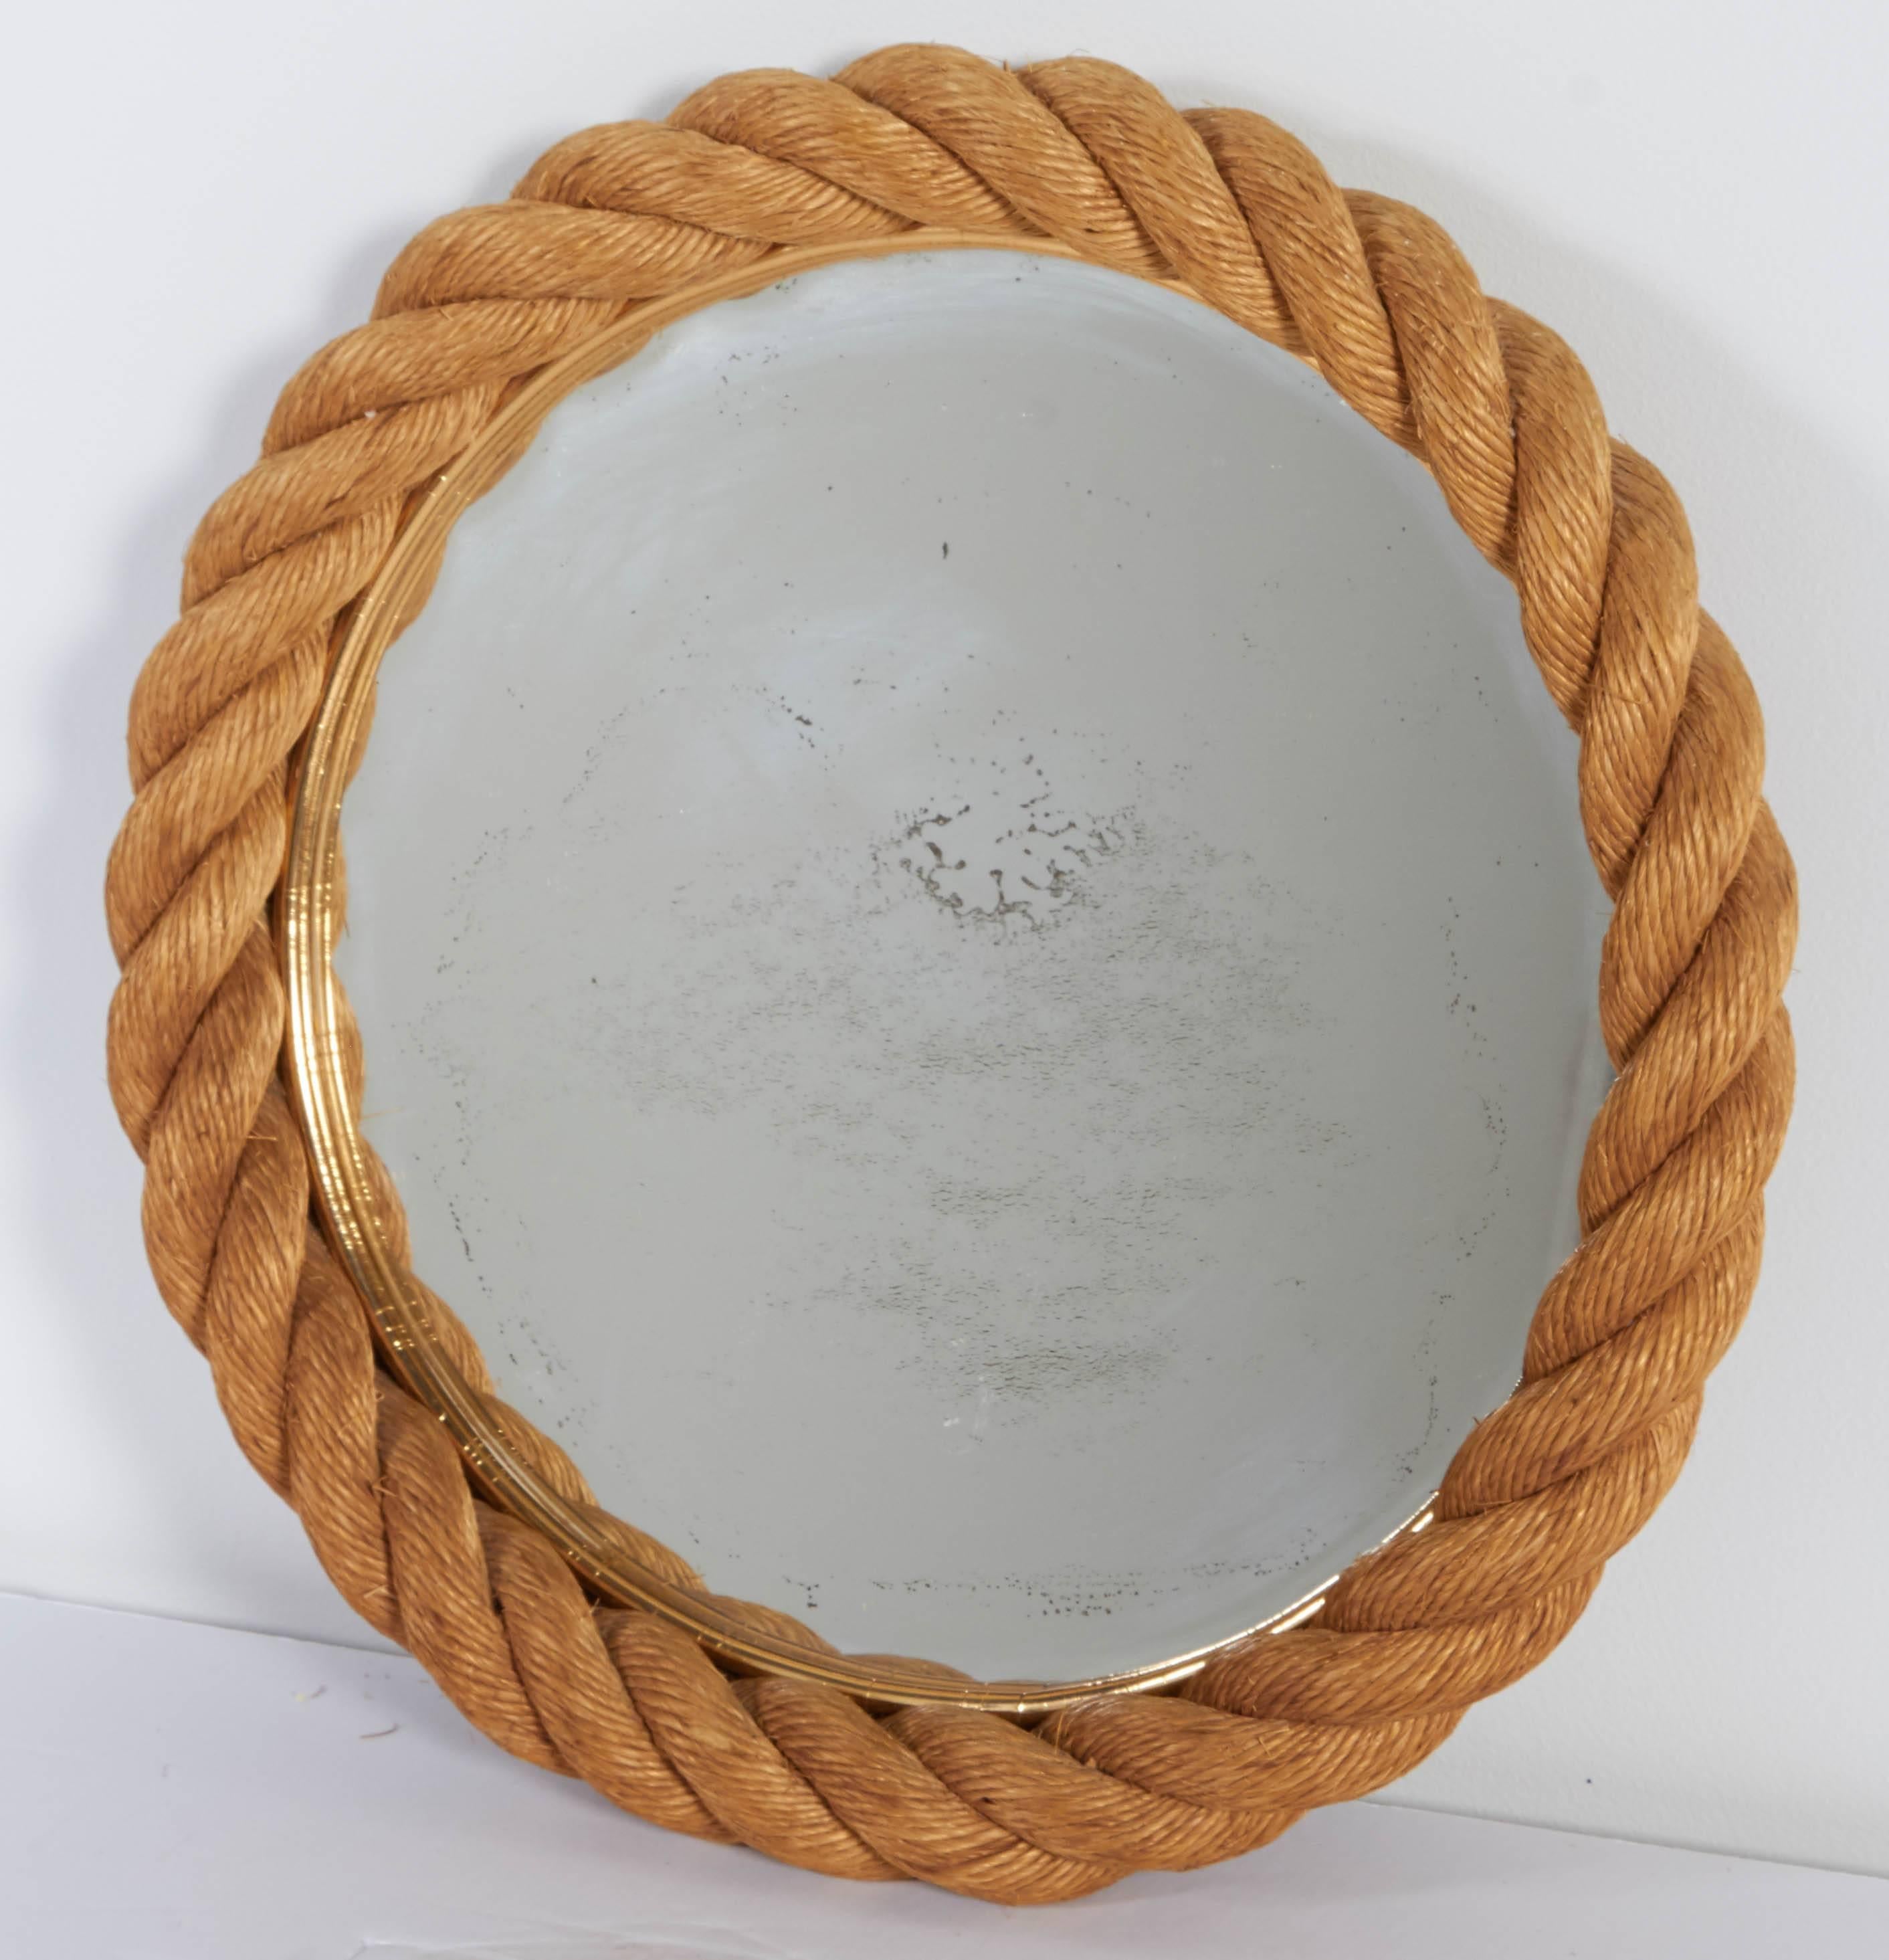 A beautiful round mirror with a rope border that would complement any nautical lifestyle.

Not available for sale or to ship in the state of California.